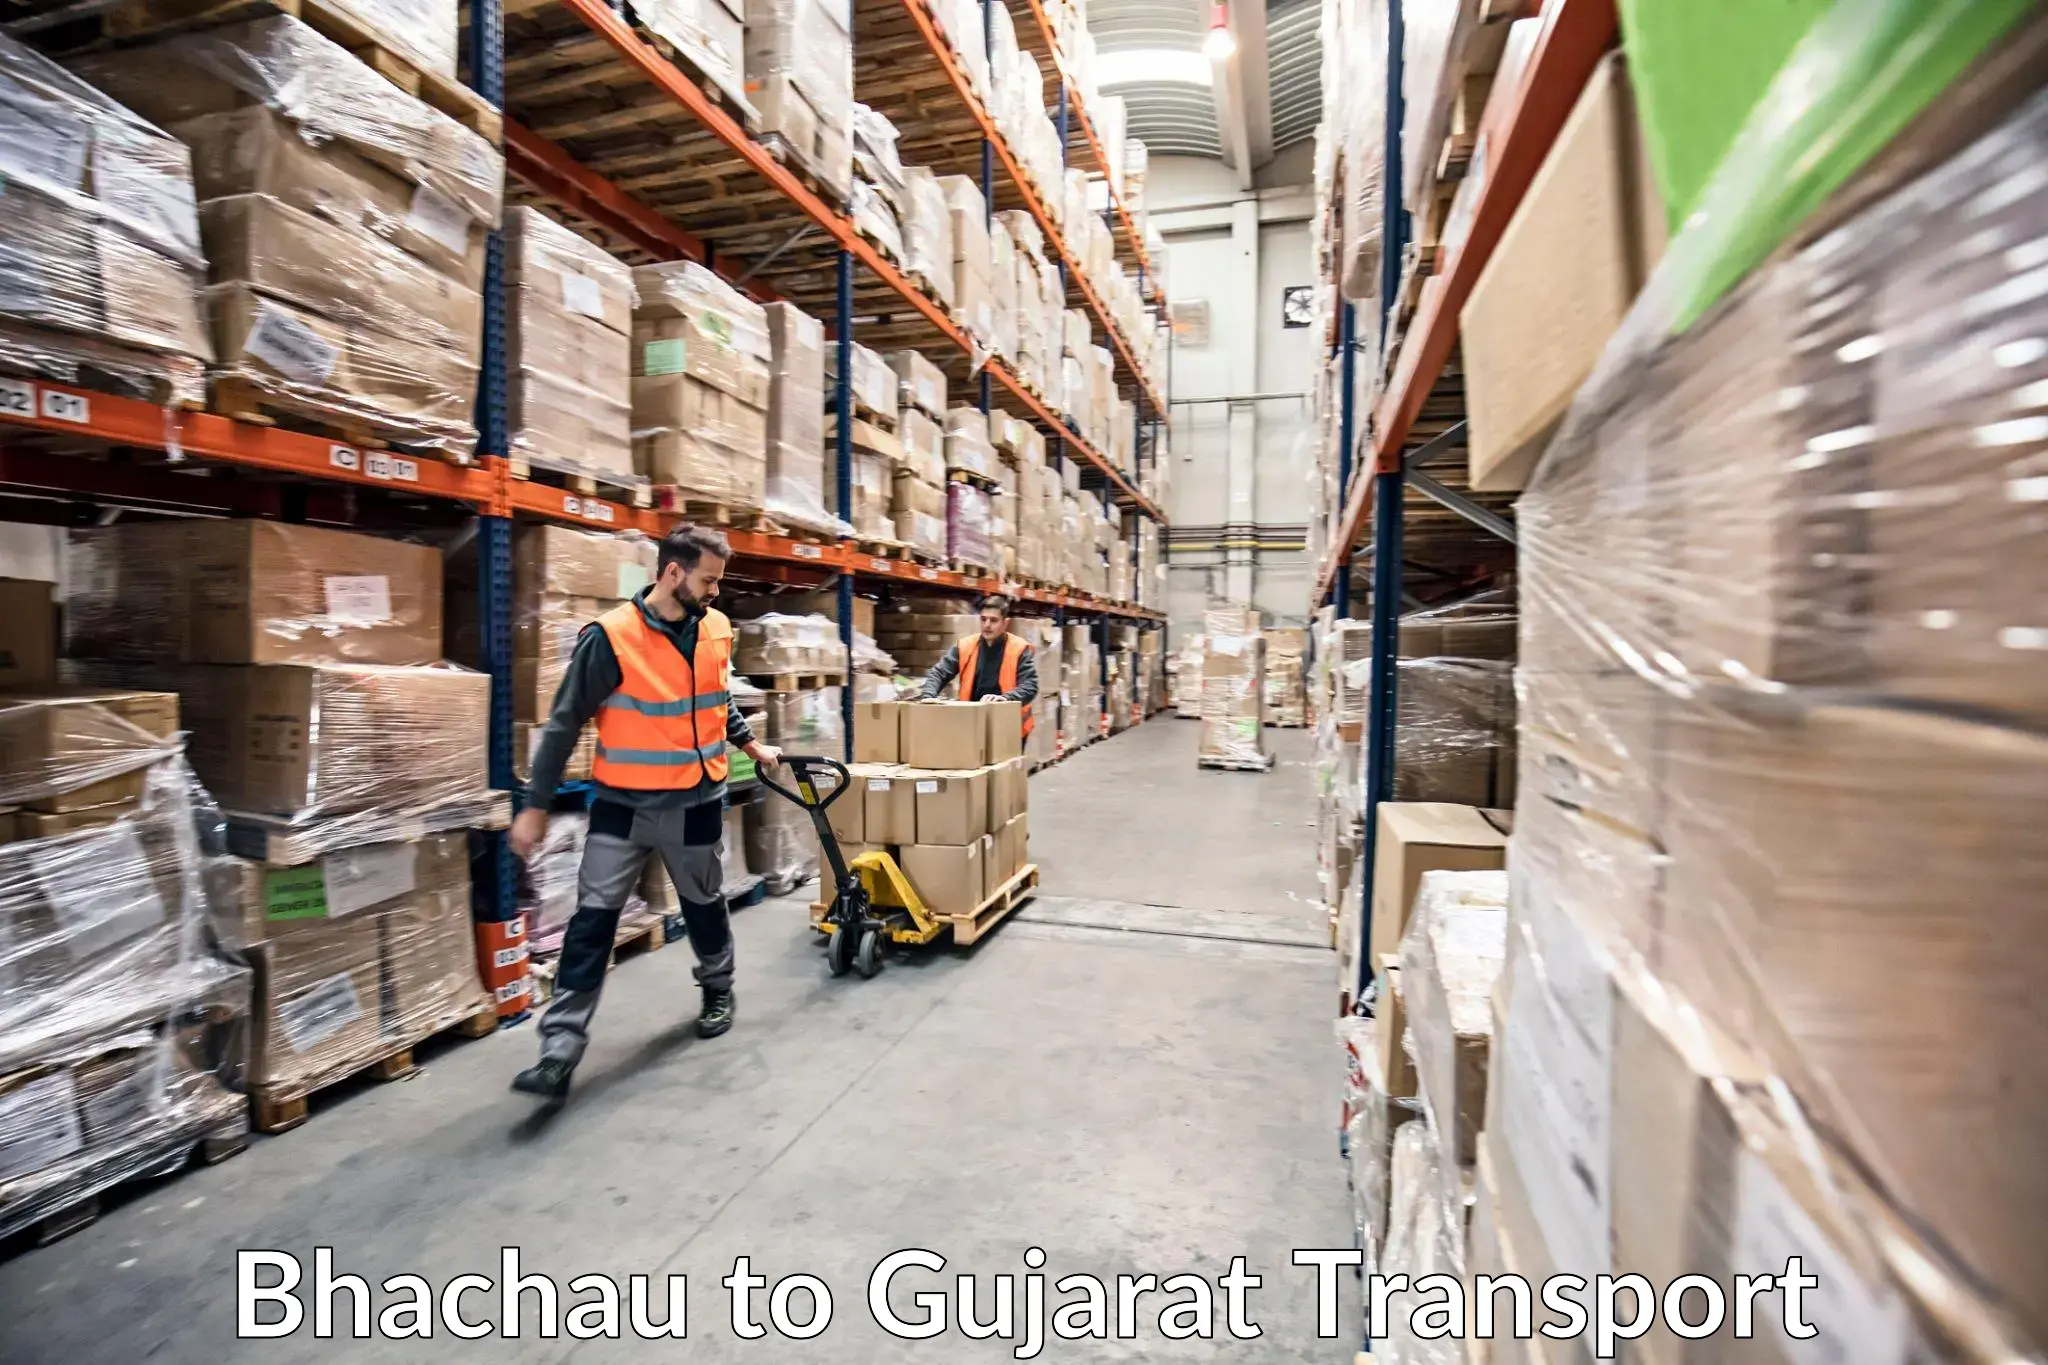 Daily parcel service transport in Bhachau to Surat